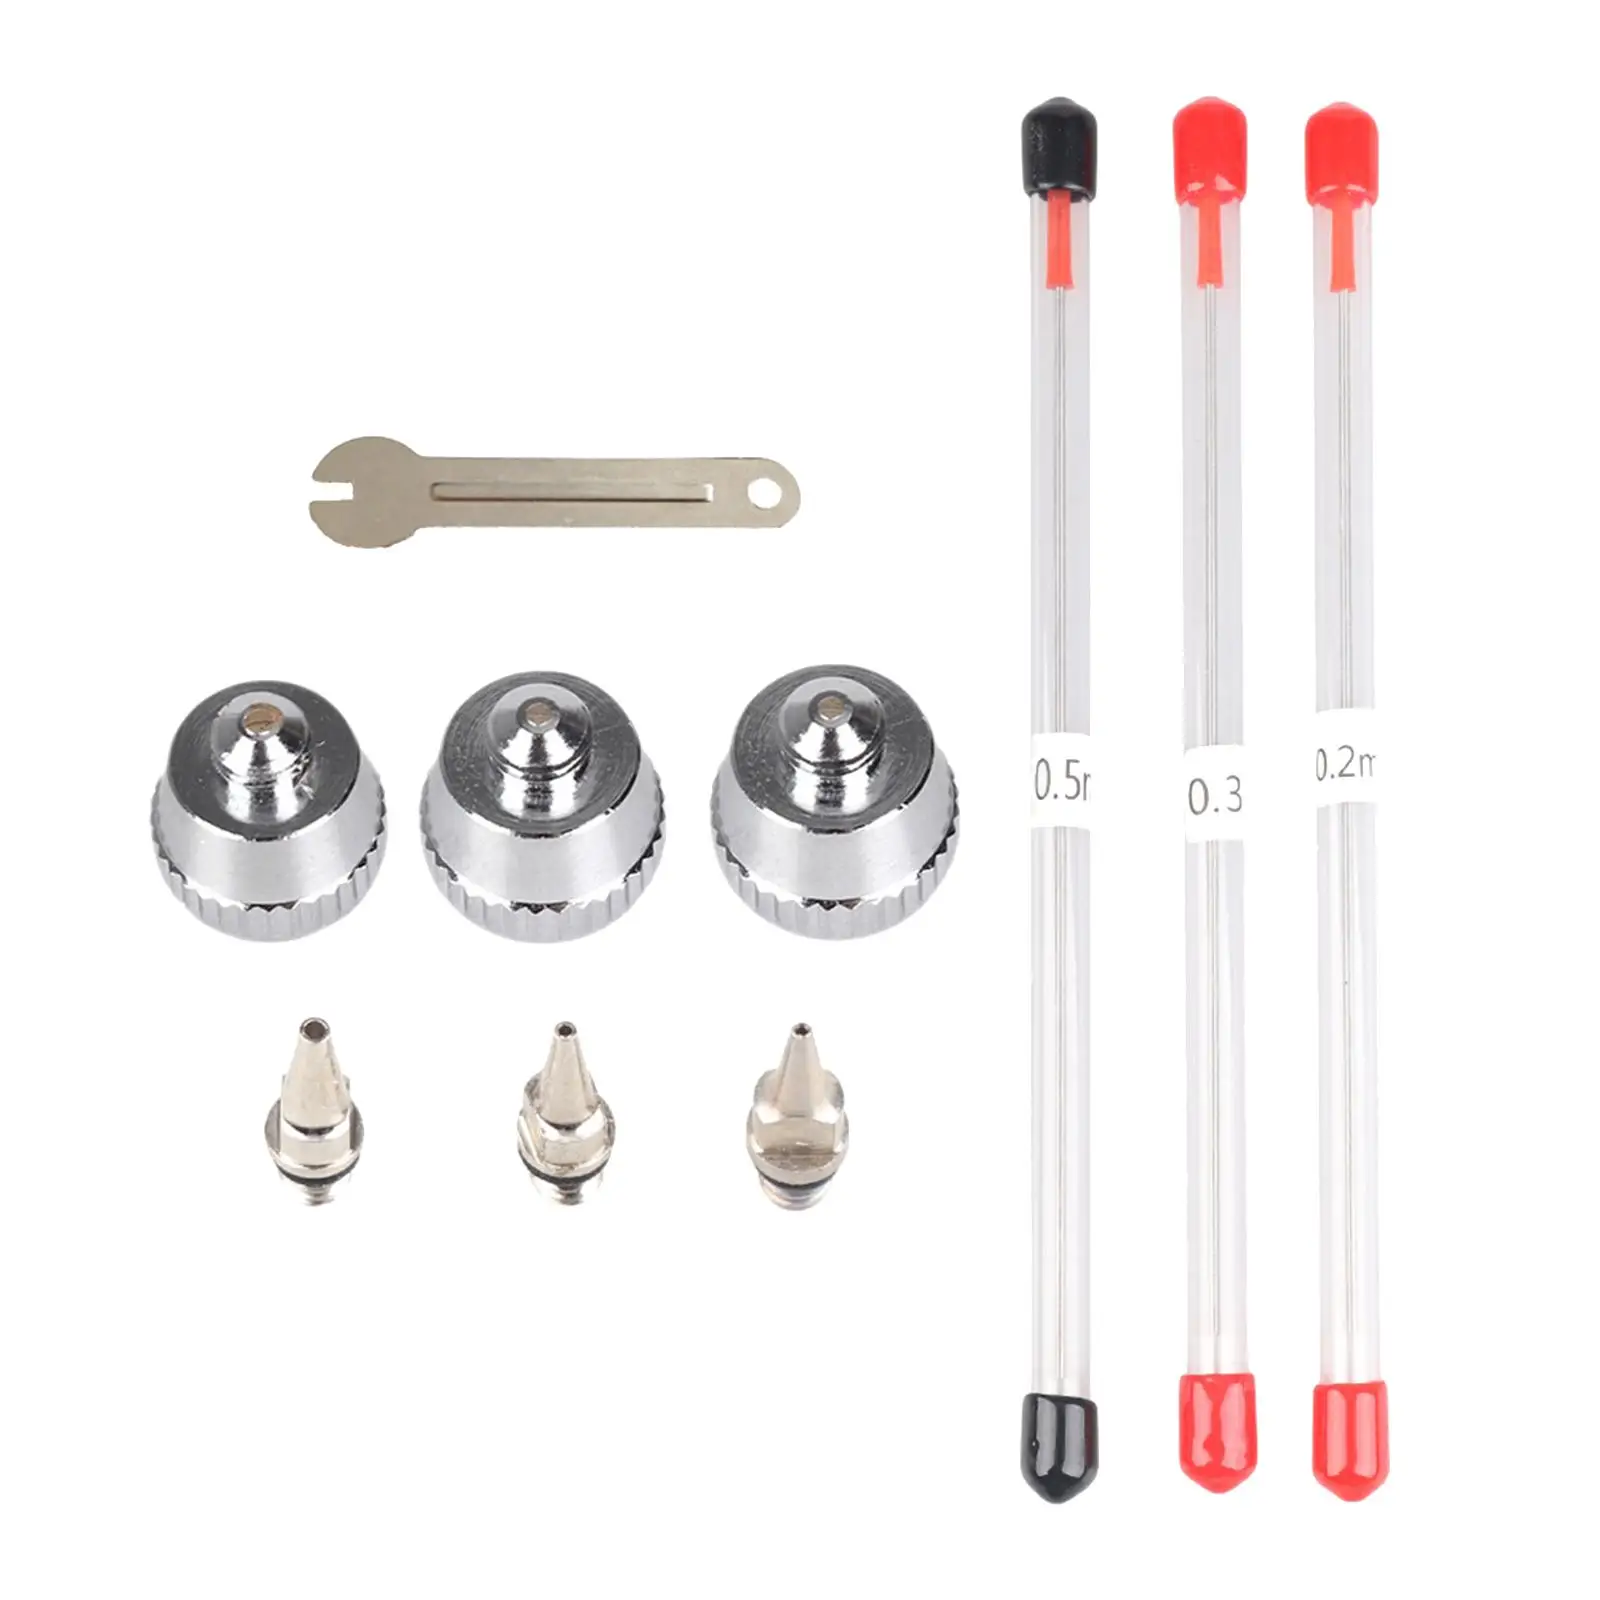 10 Pieces Airbrush Nozzle Needle Manual Tool Upgraded Sturdy Stainless Steel Multifunction for Airbrush Handcraft Spare Parts